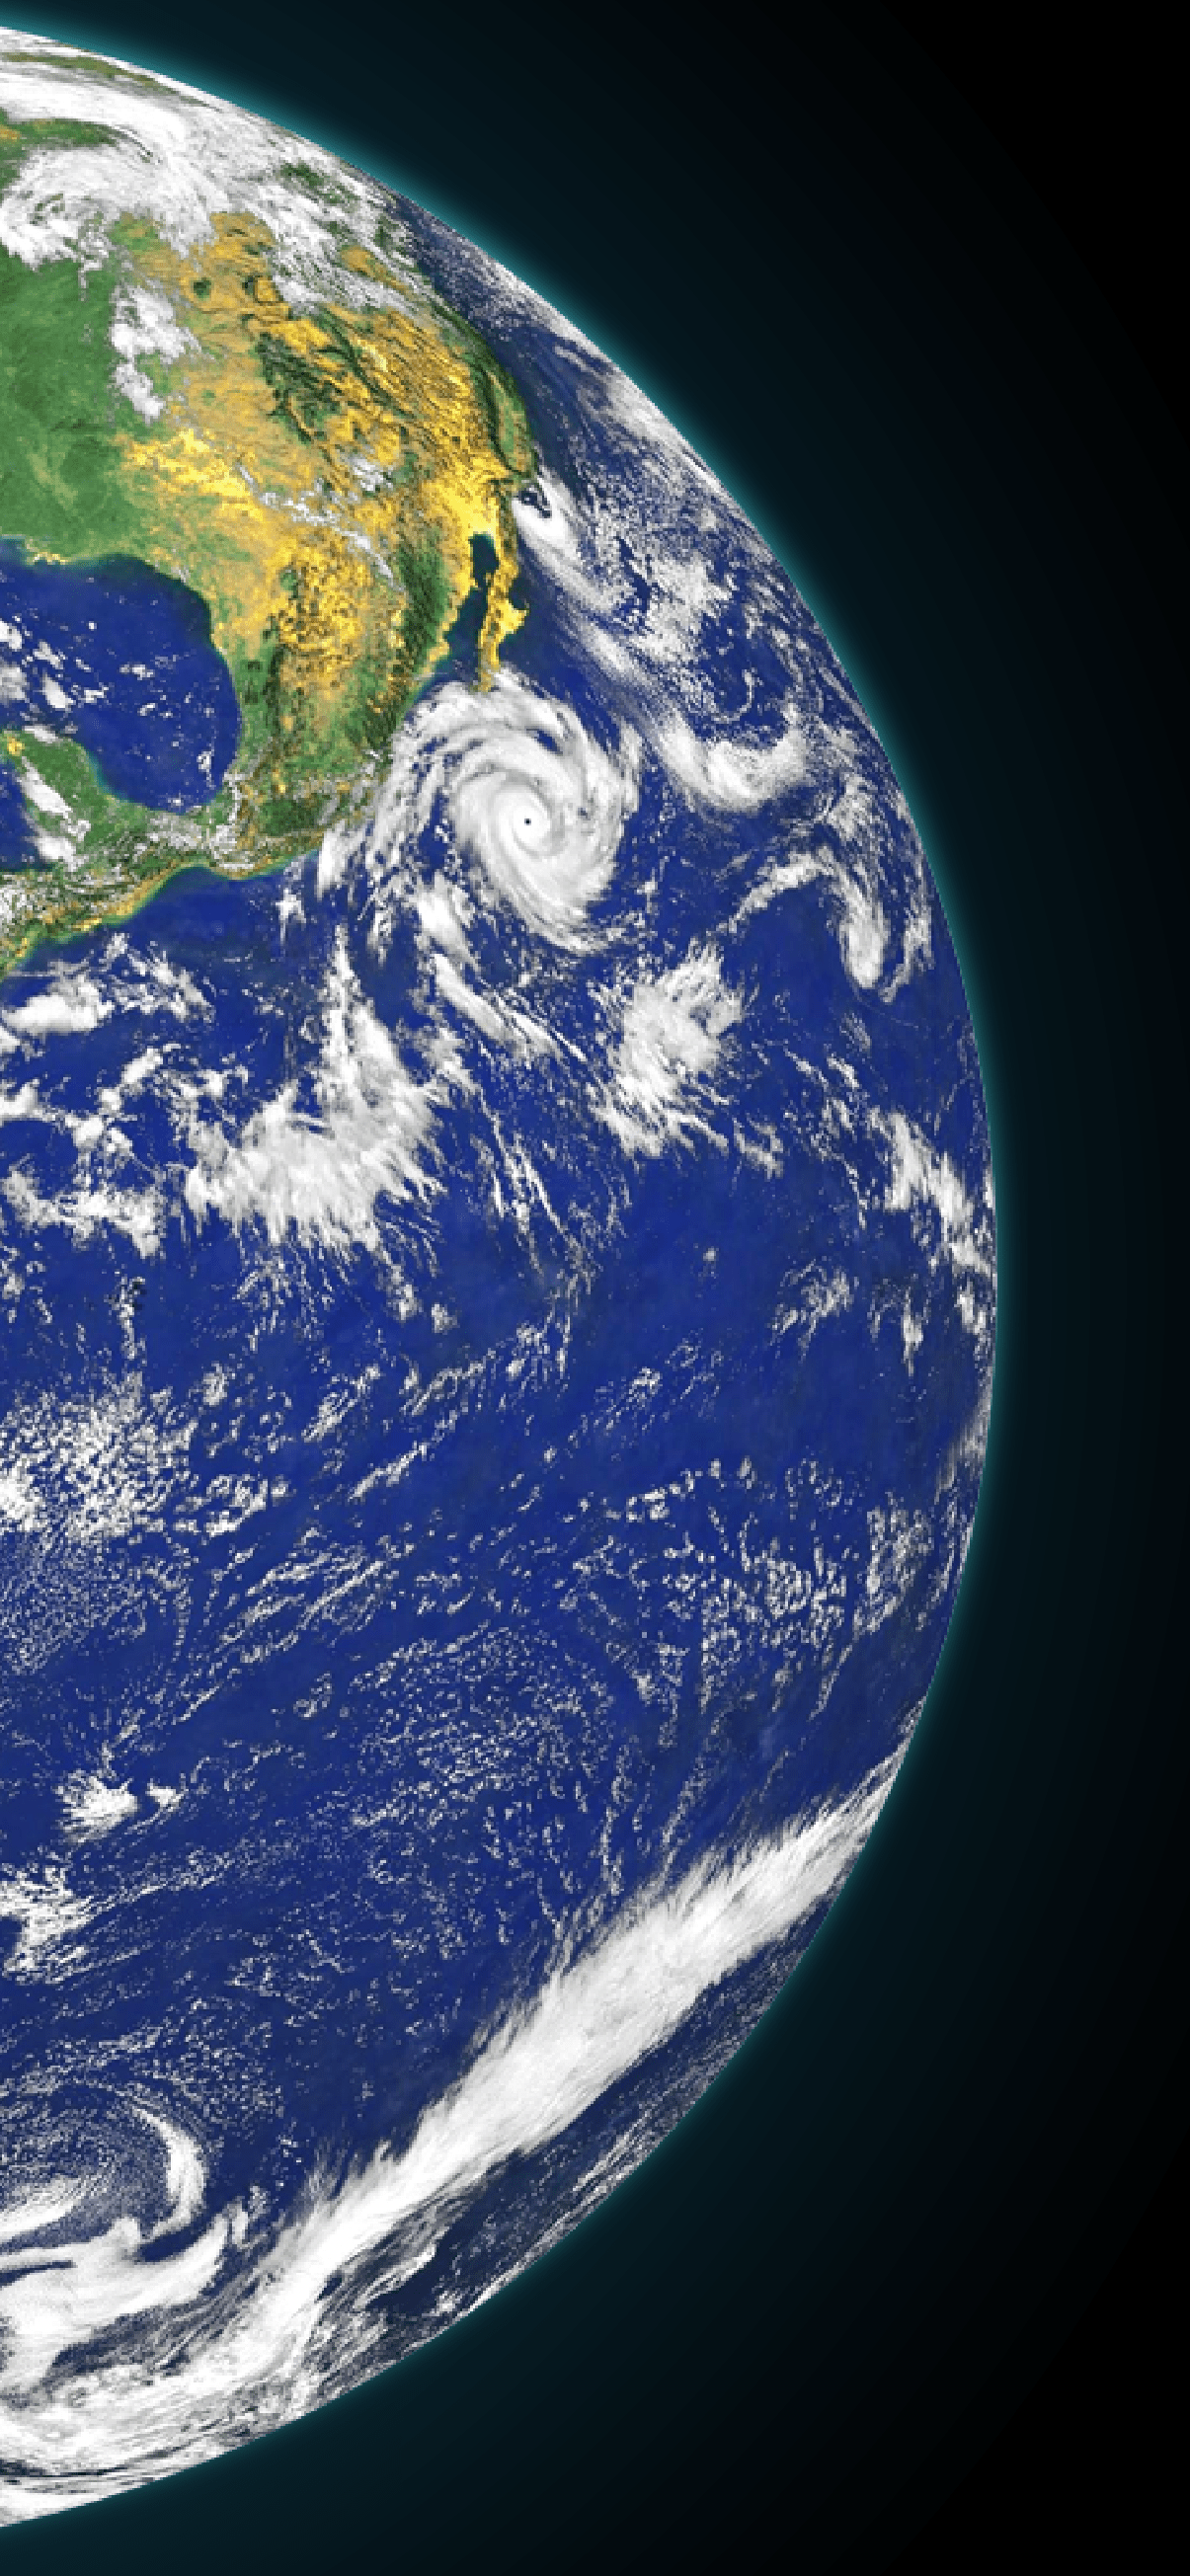 A satellite view of the earth showing a hurricane. - Earth